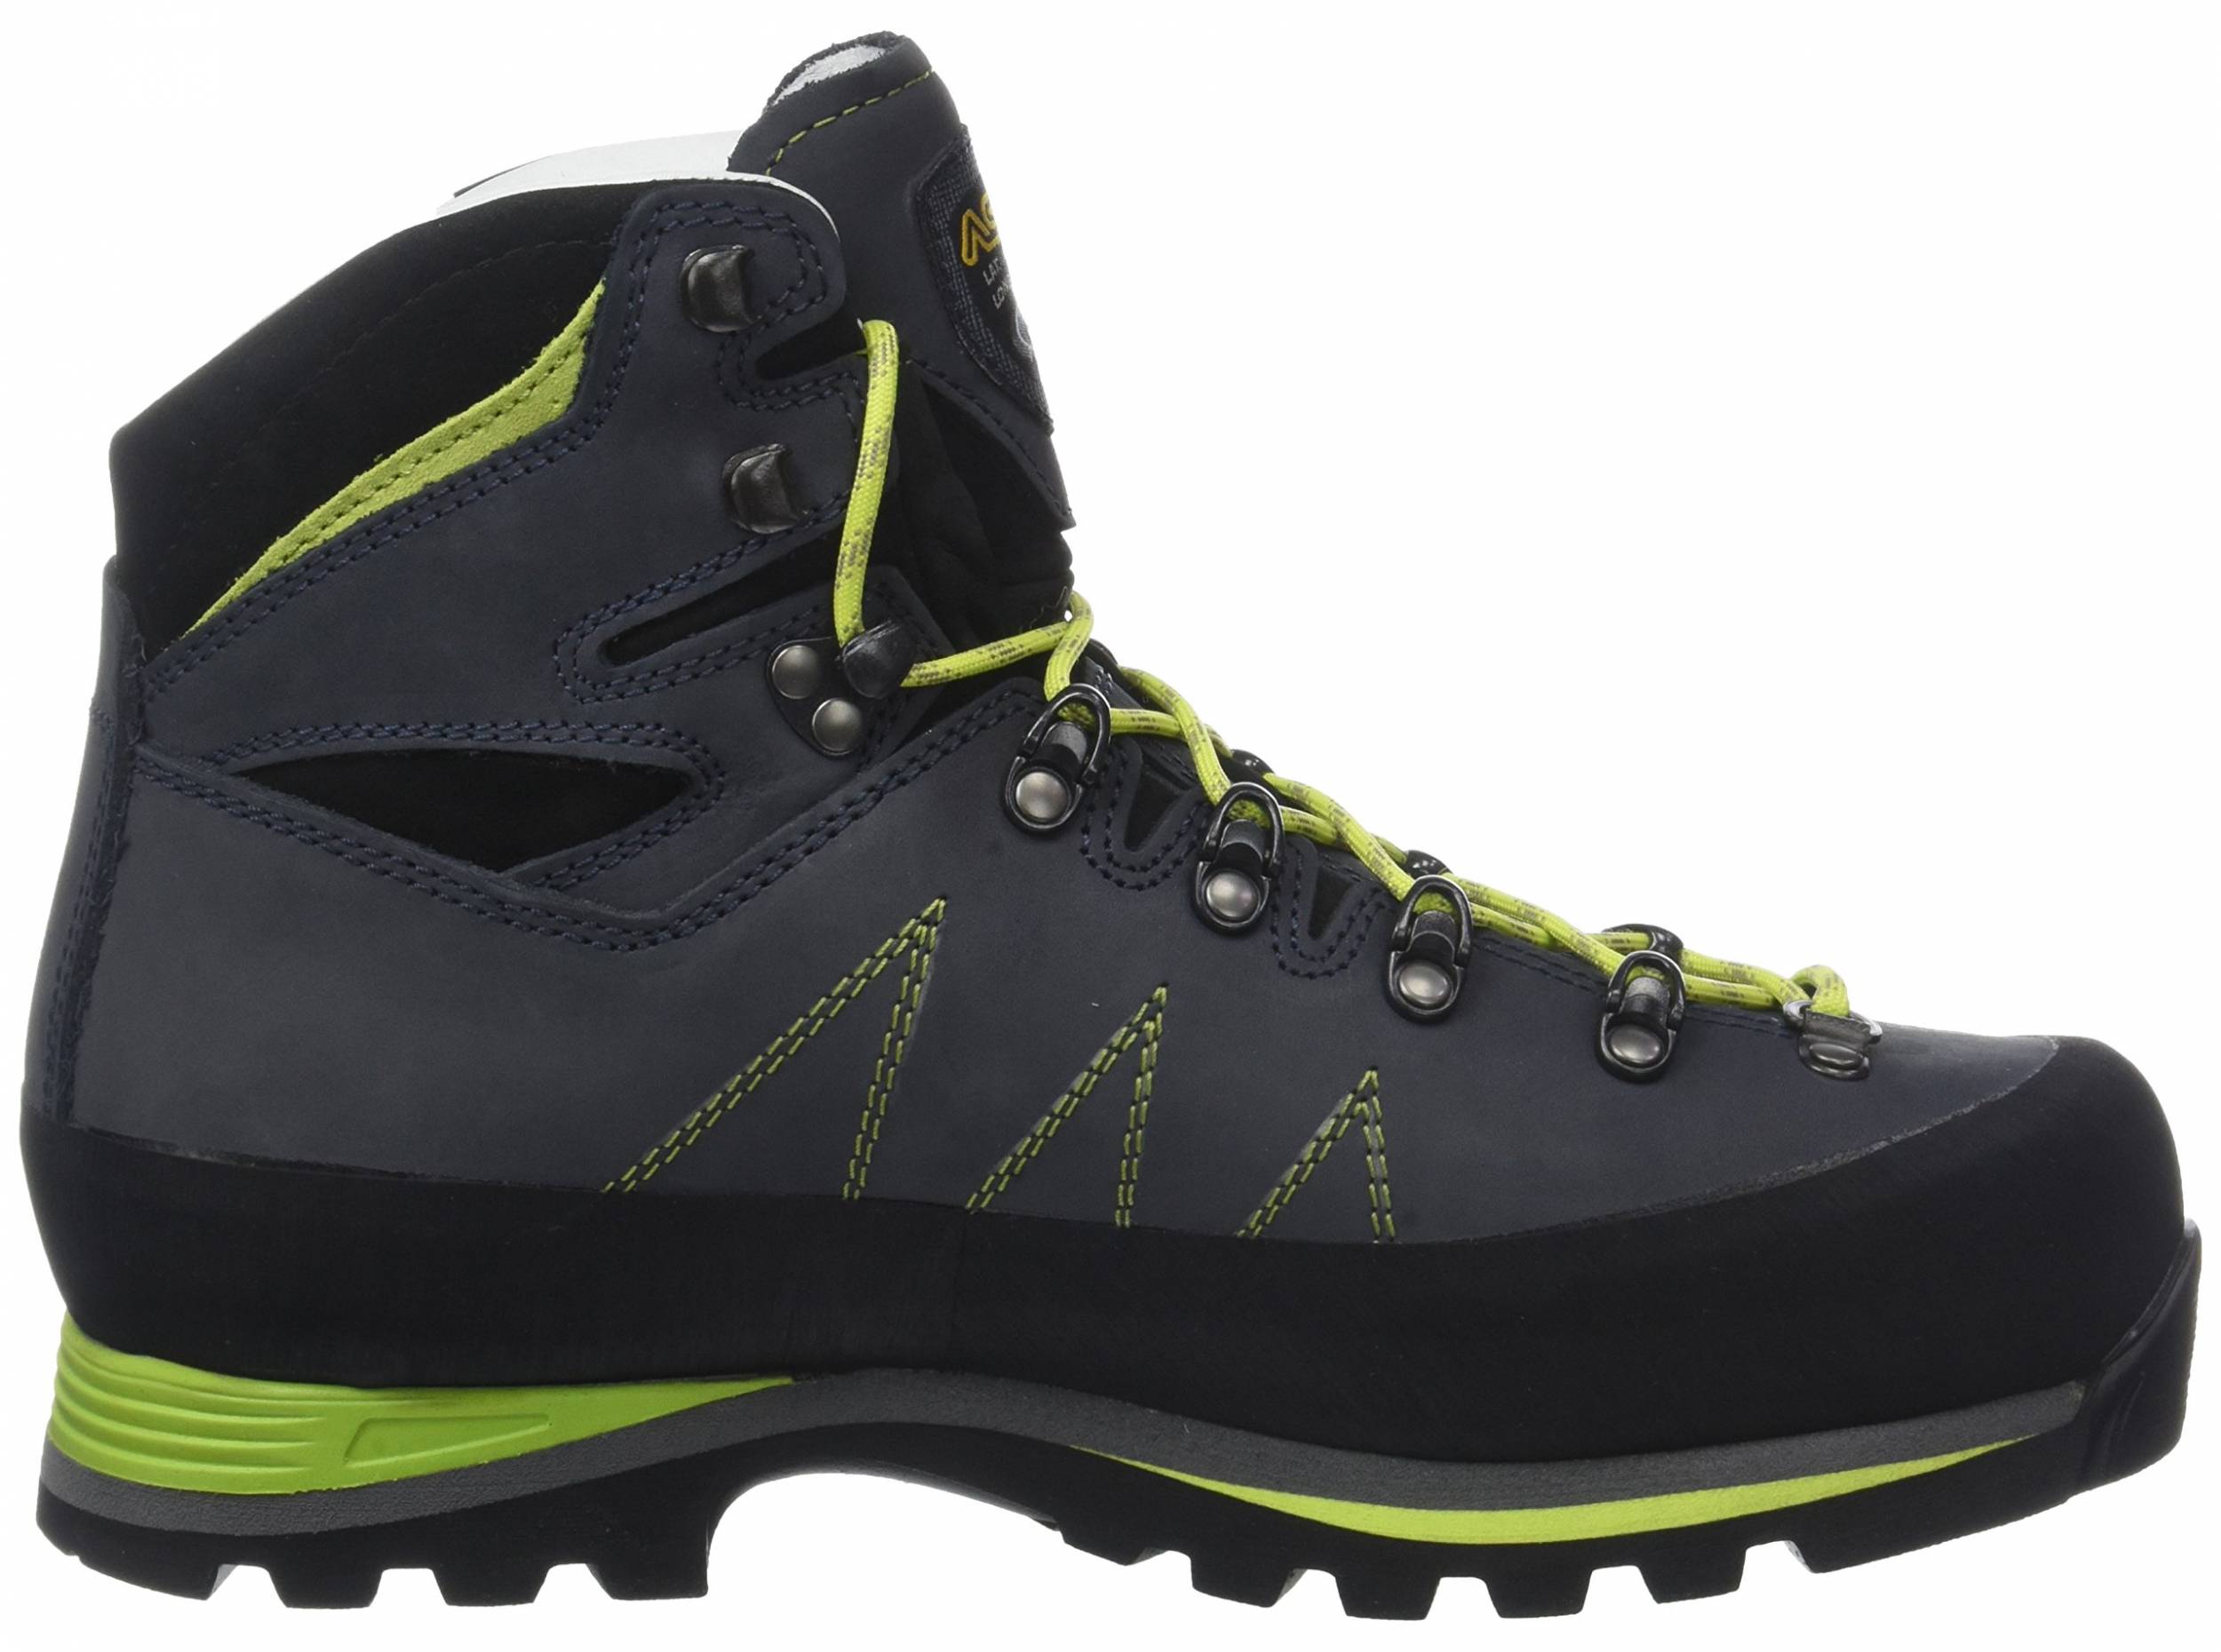 Save 17% on Asolo Hiking Boots (20 